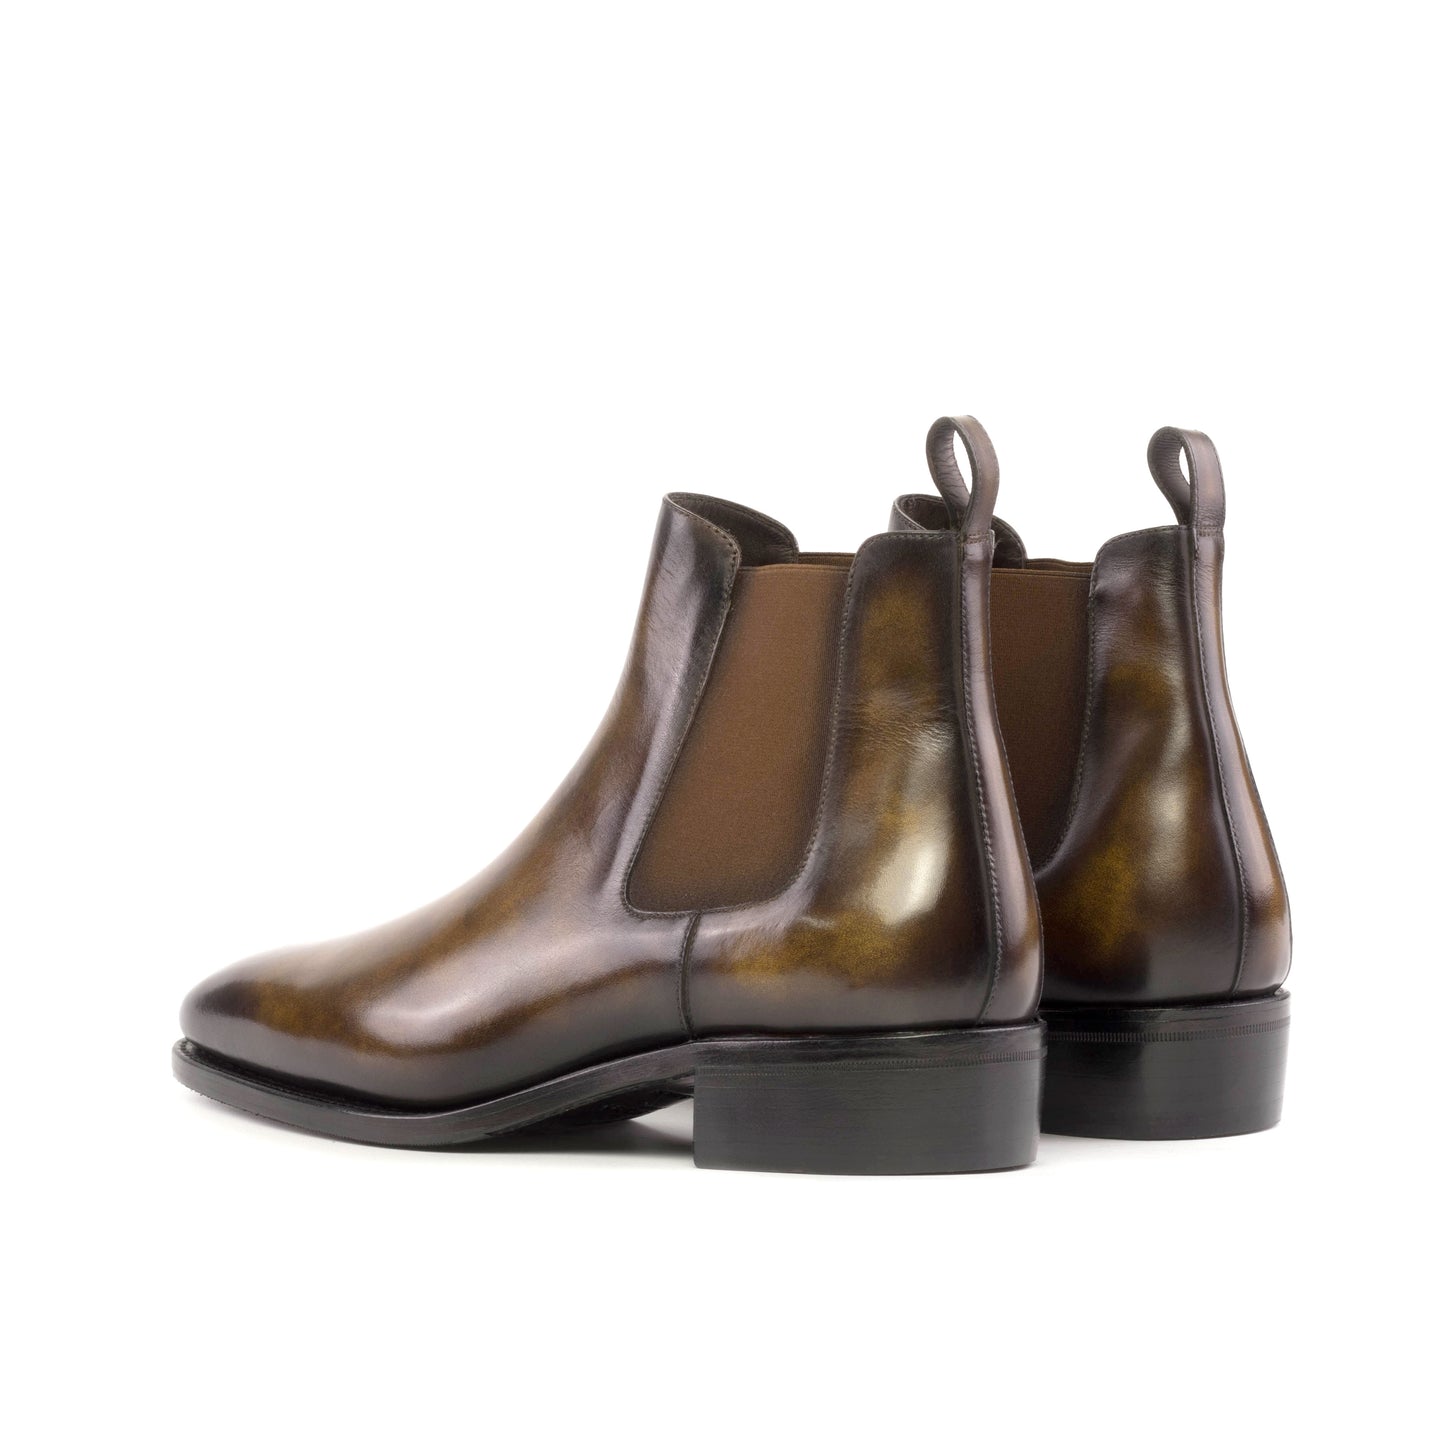 Chelsea Boots - tobacco patina